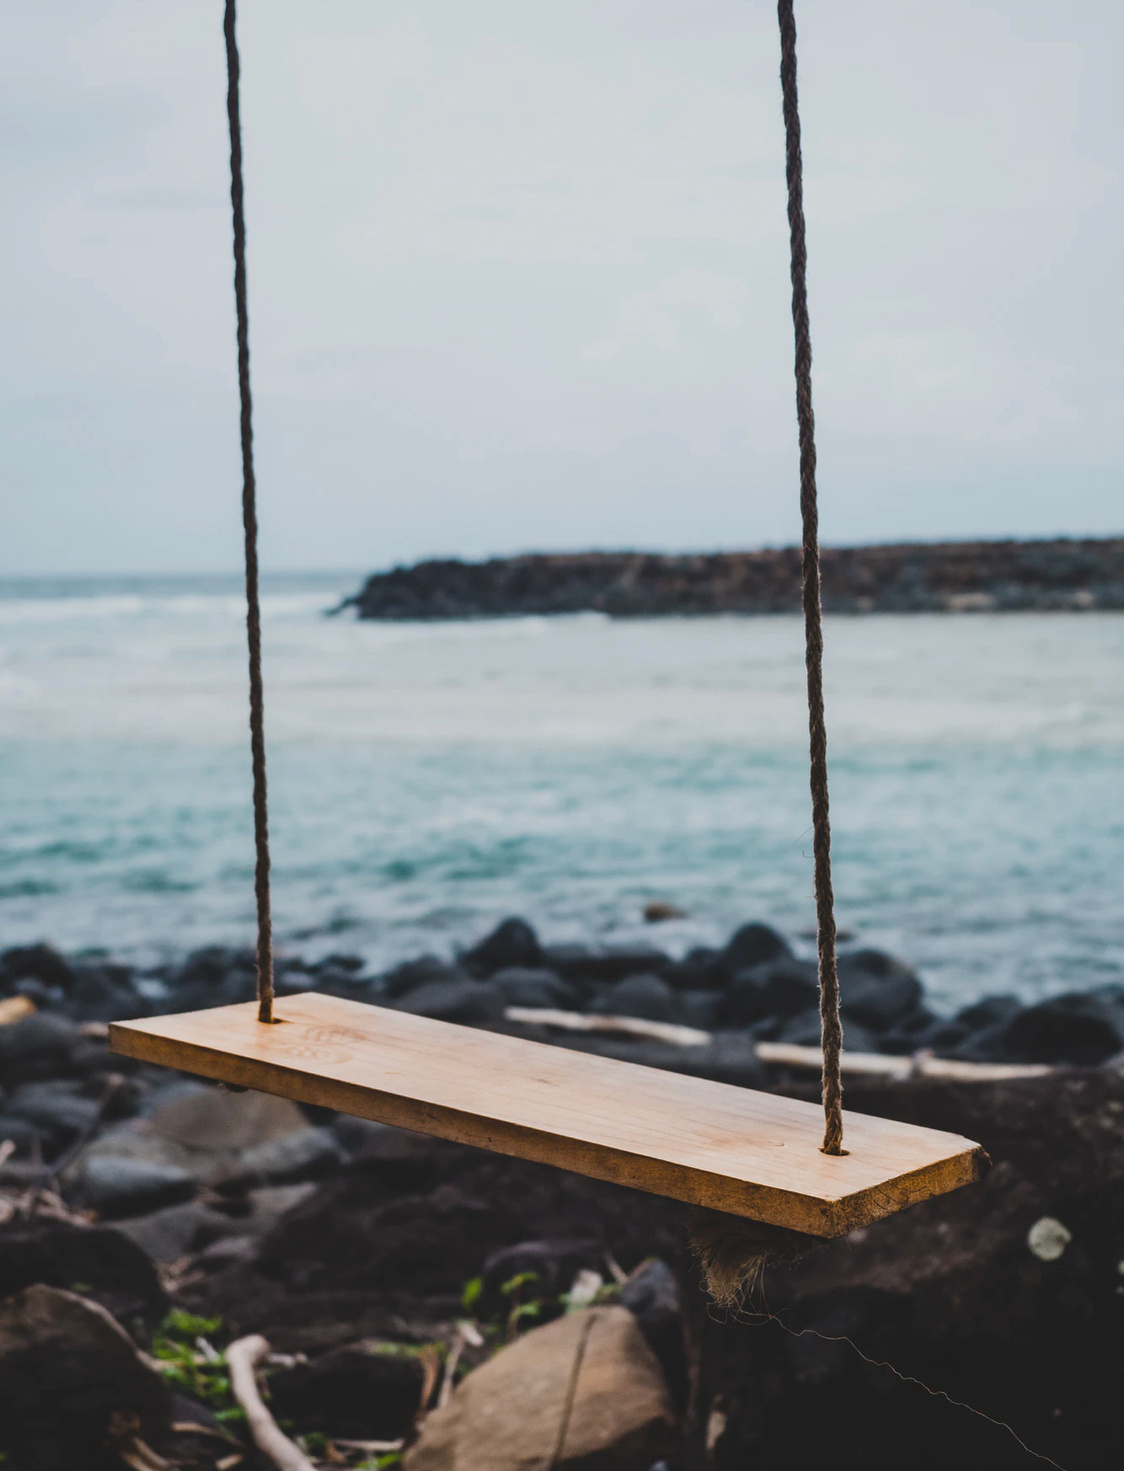 An empty wooden swing, hanging on a rocky beach waiting for a sitter.